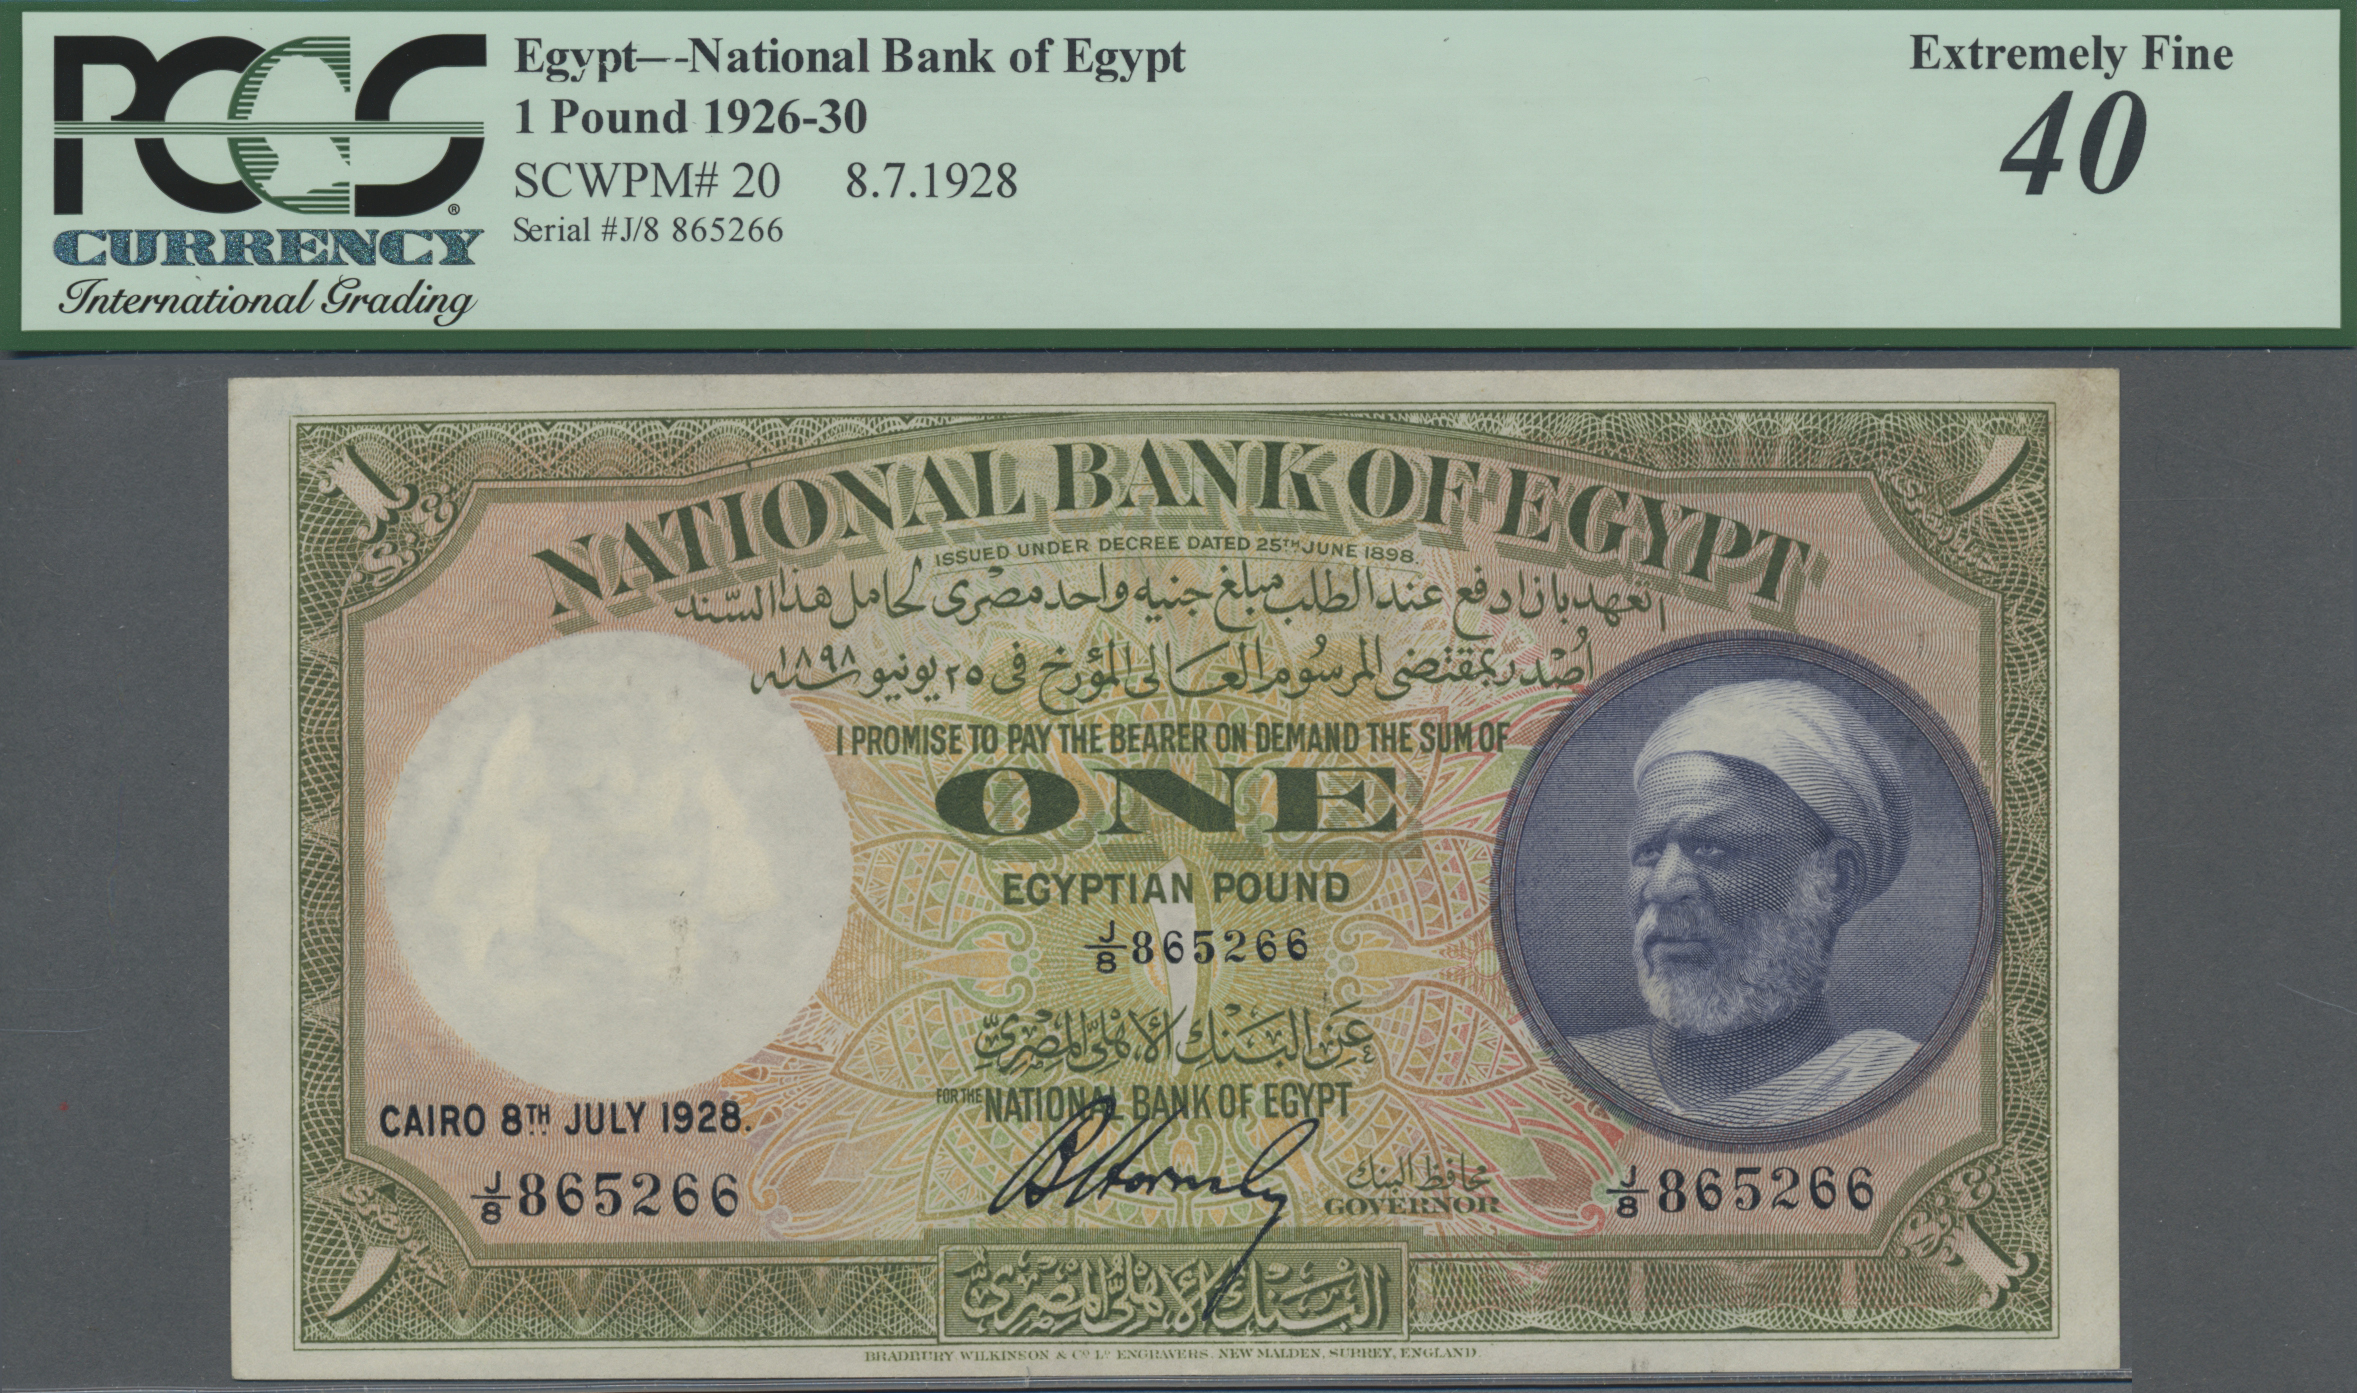 Coin Auction - Egypt / Ägypten | Banknoten - Sale #46 The Banknotes  Worldwide section of the 46th Christoph Gärtner Auction